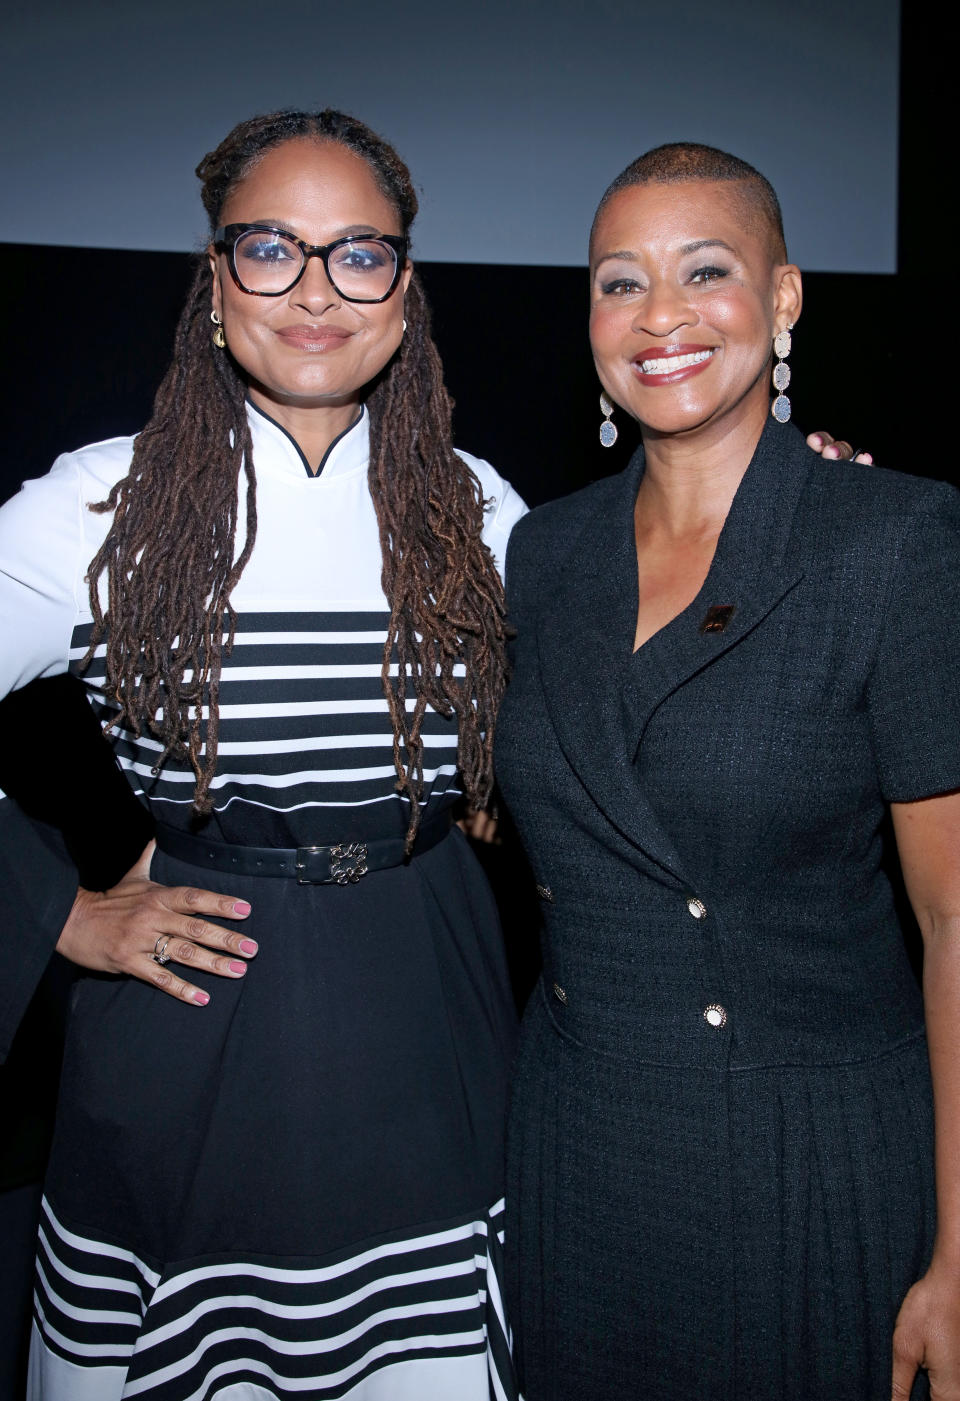 Ava DuVernay and director and president of the Academy Museum of Motion Pictures Jacqueline Stewart attend the press preview for the Academy Museum’s exhibit “Regeneration: Black Cinema 1898-1971.” - Credit: Robin L Marshall/Getty Images